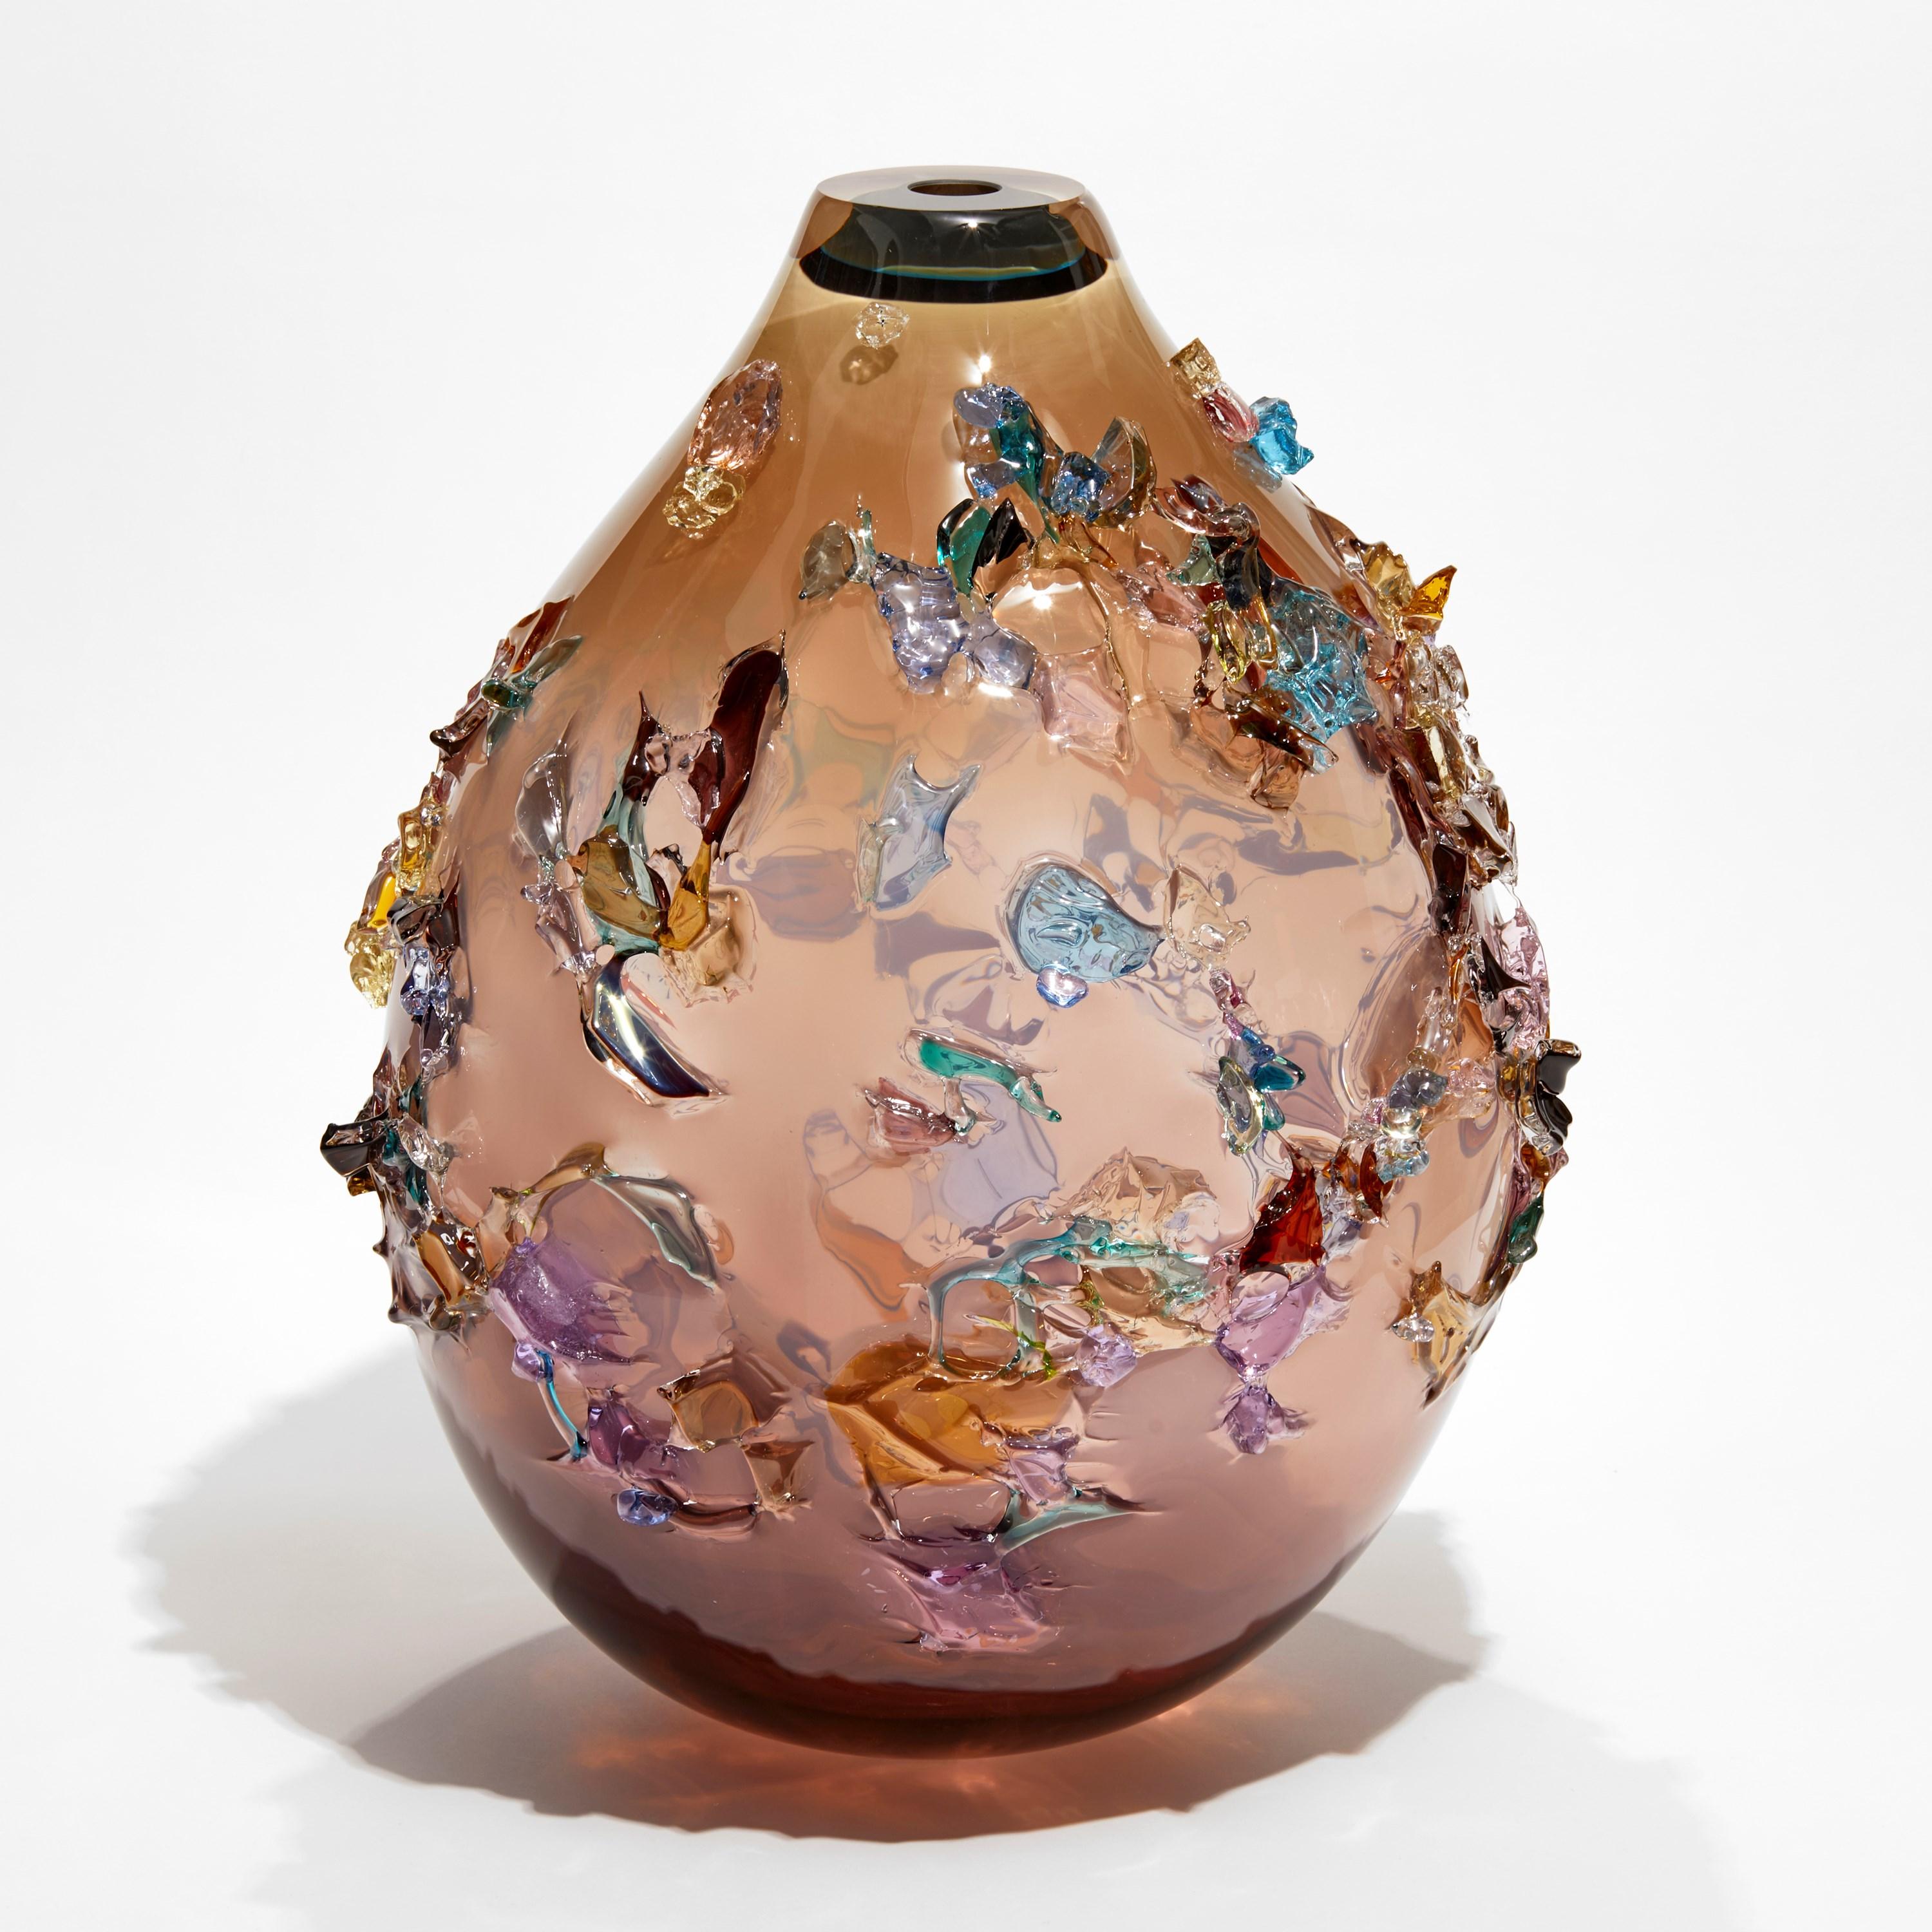  Sakura TRP22003 is a unique softy pink/aubergine and multicolored hand-blown art glass sculptural vase, covered in an organic glass shard adornment by the Dutch artist Maarten Vorlijk. The piece is flame polished to soften the edges of all the